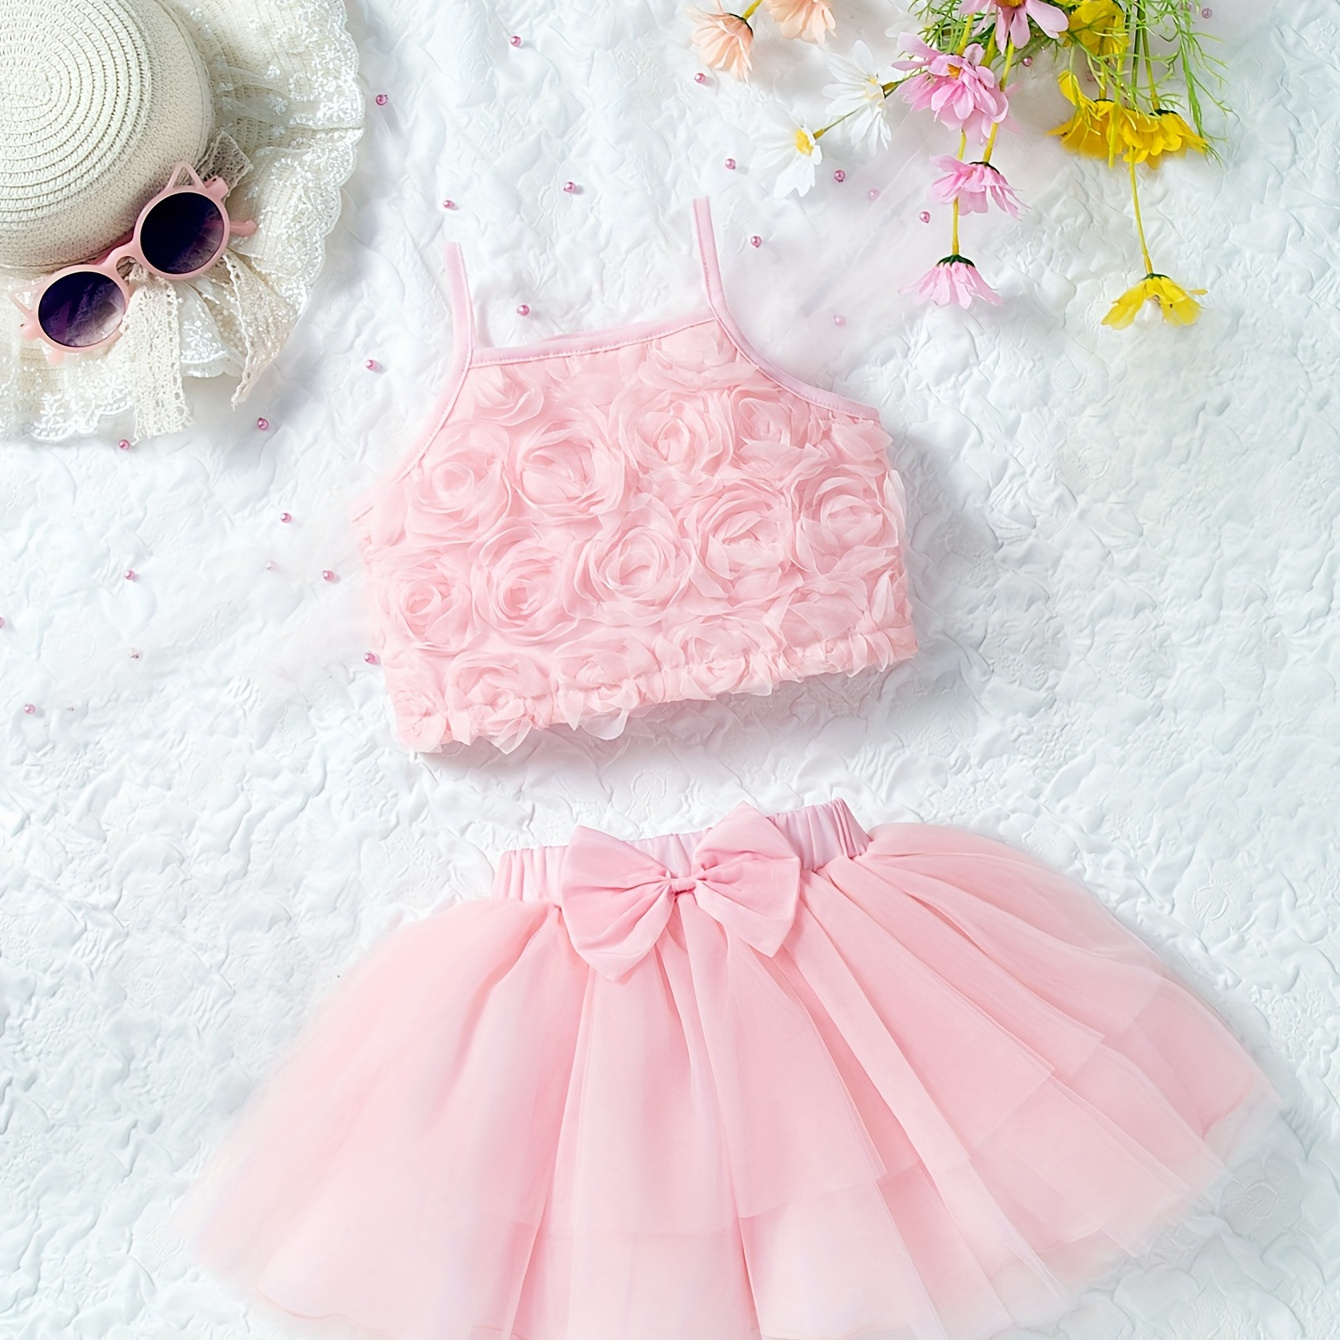 

2-piece Girl's Rose Jacquard Cami Top + Bow Tutu Skirt Set Holiday Birthday Outfit Summer Gift